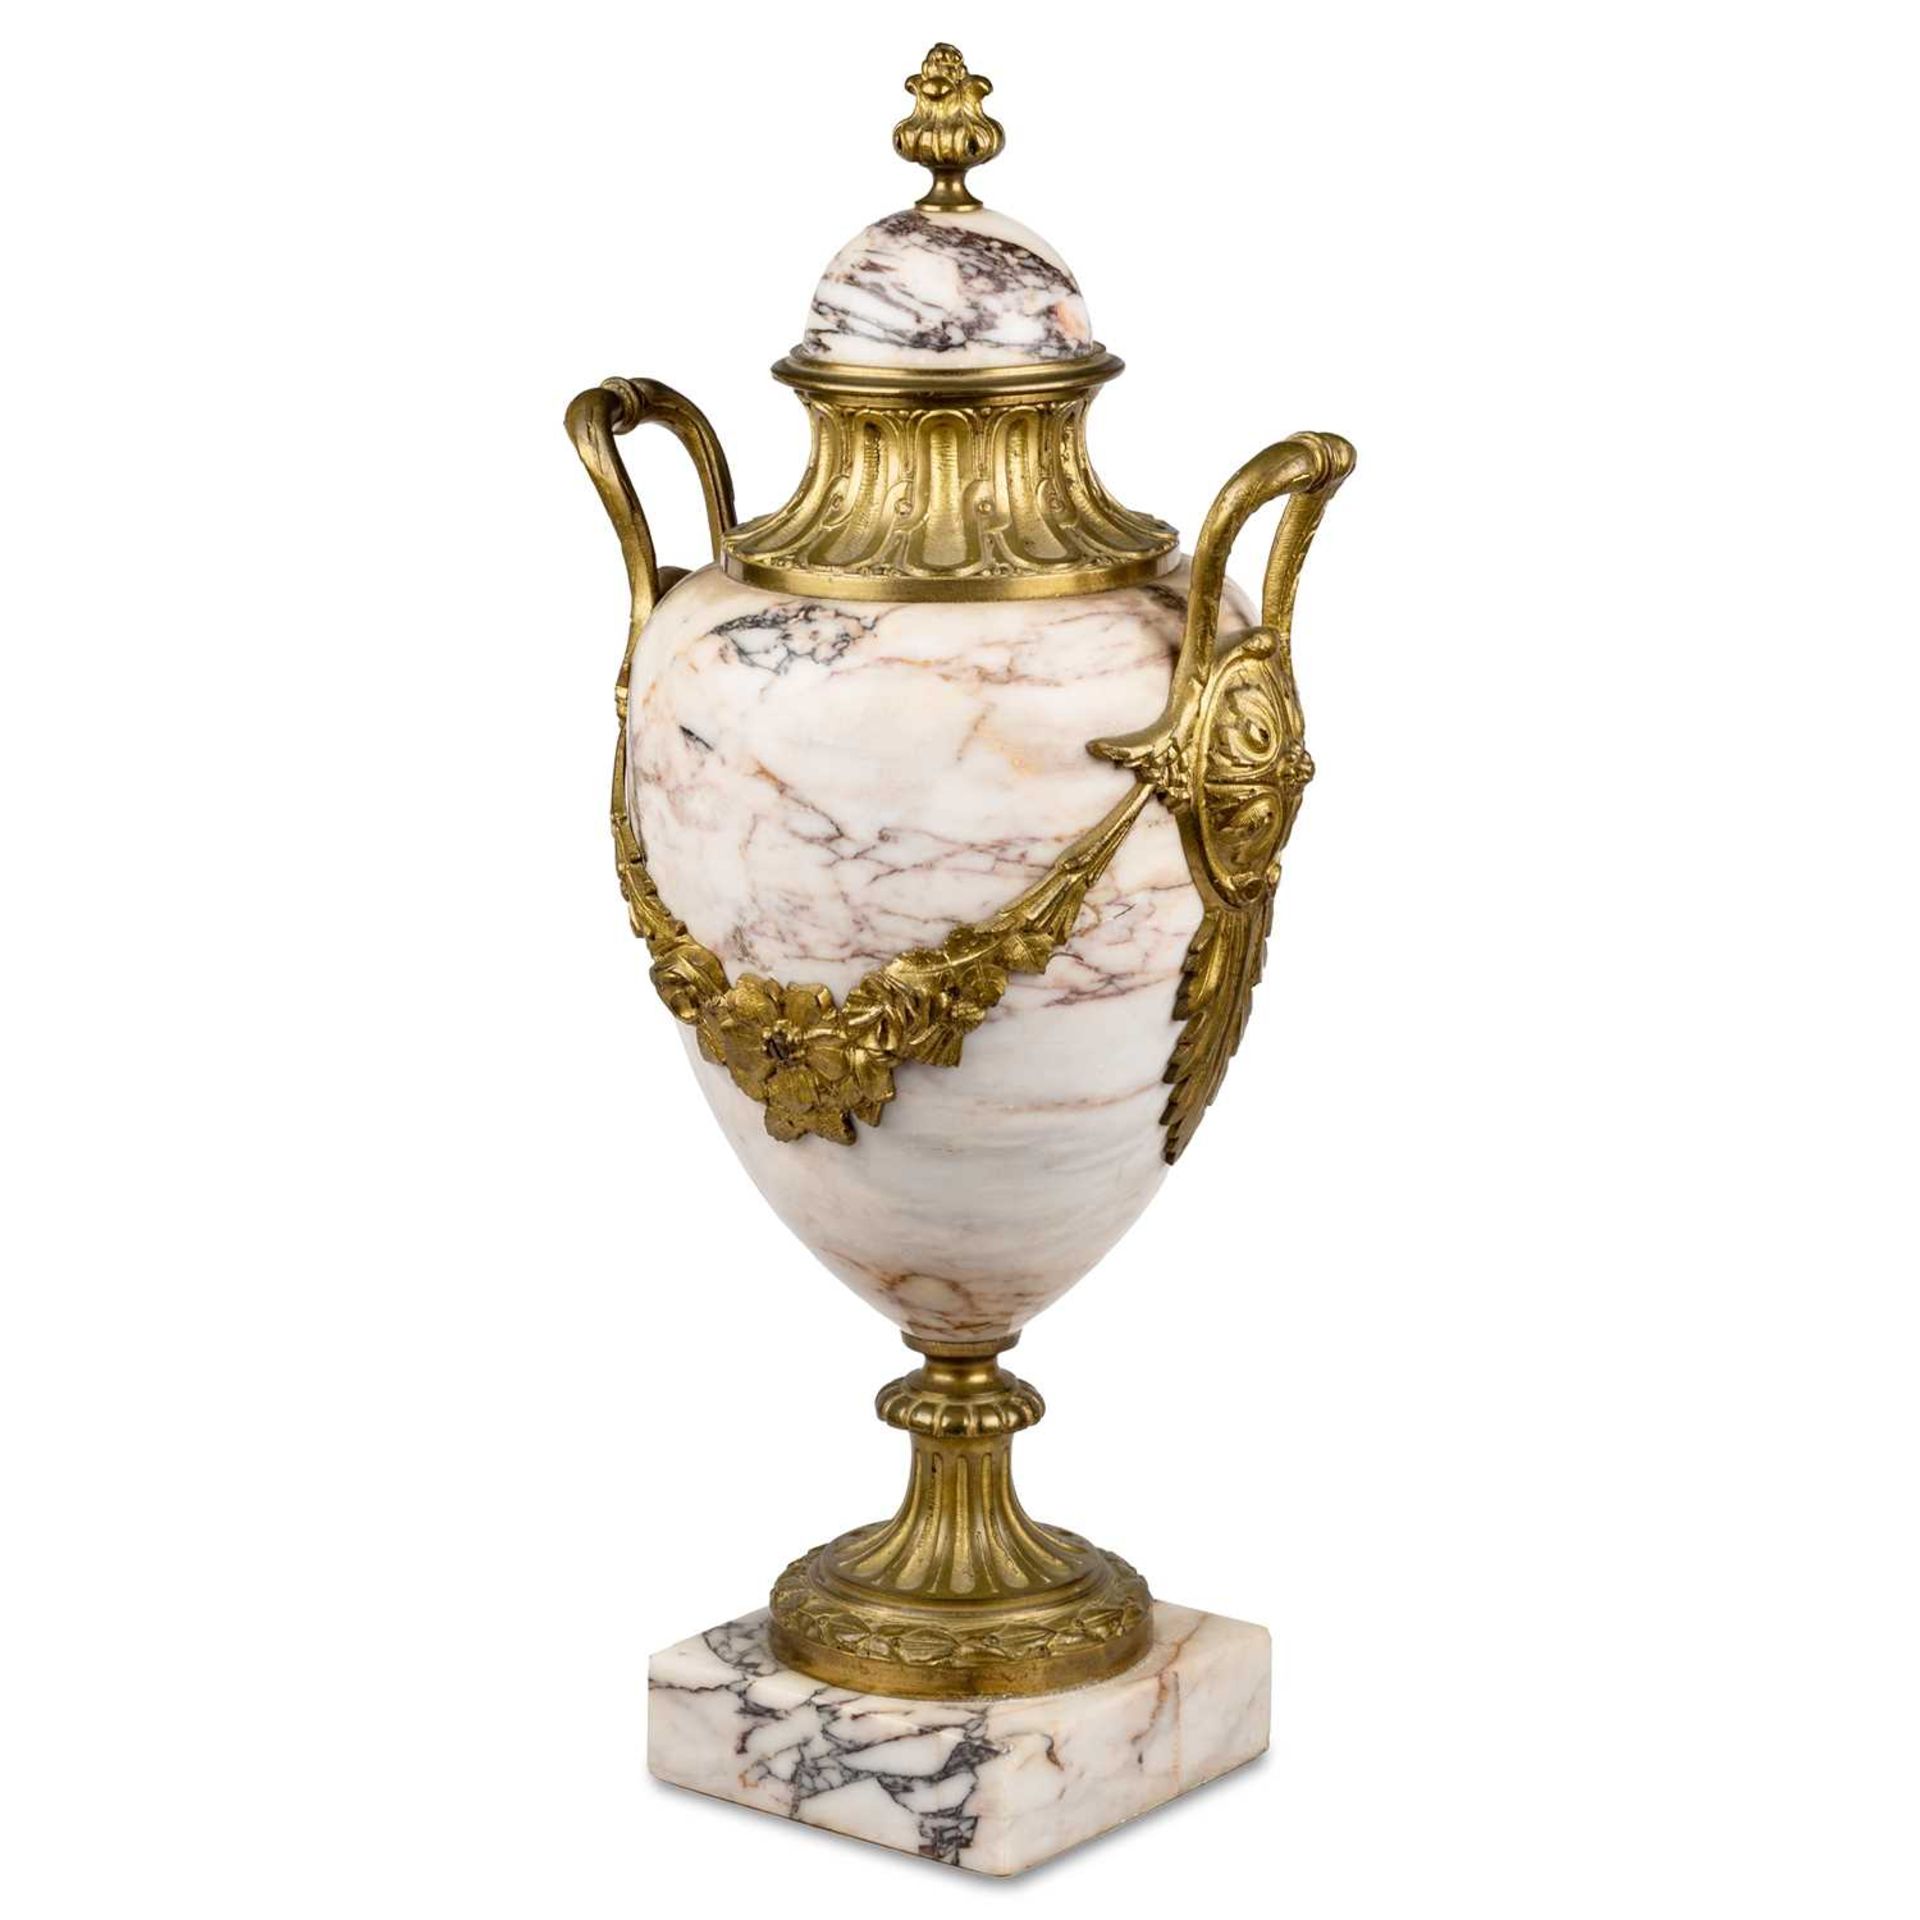 A PAIR OF LOUIS XVI STYLE GILT-BRONZE MOUNTED MARBLE CASSOLETTES, 19TH CENTURY - Image 3 of 3